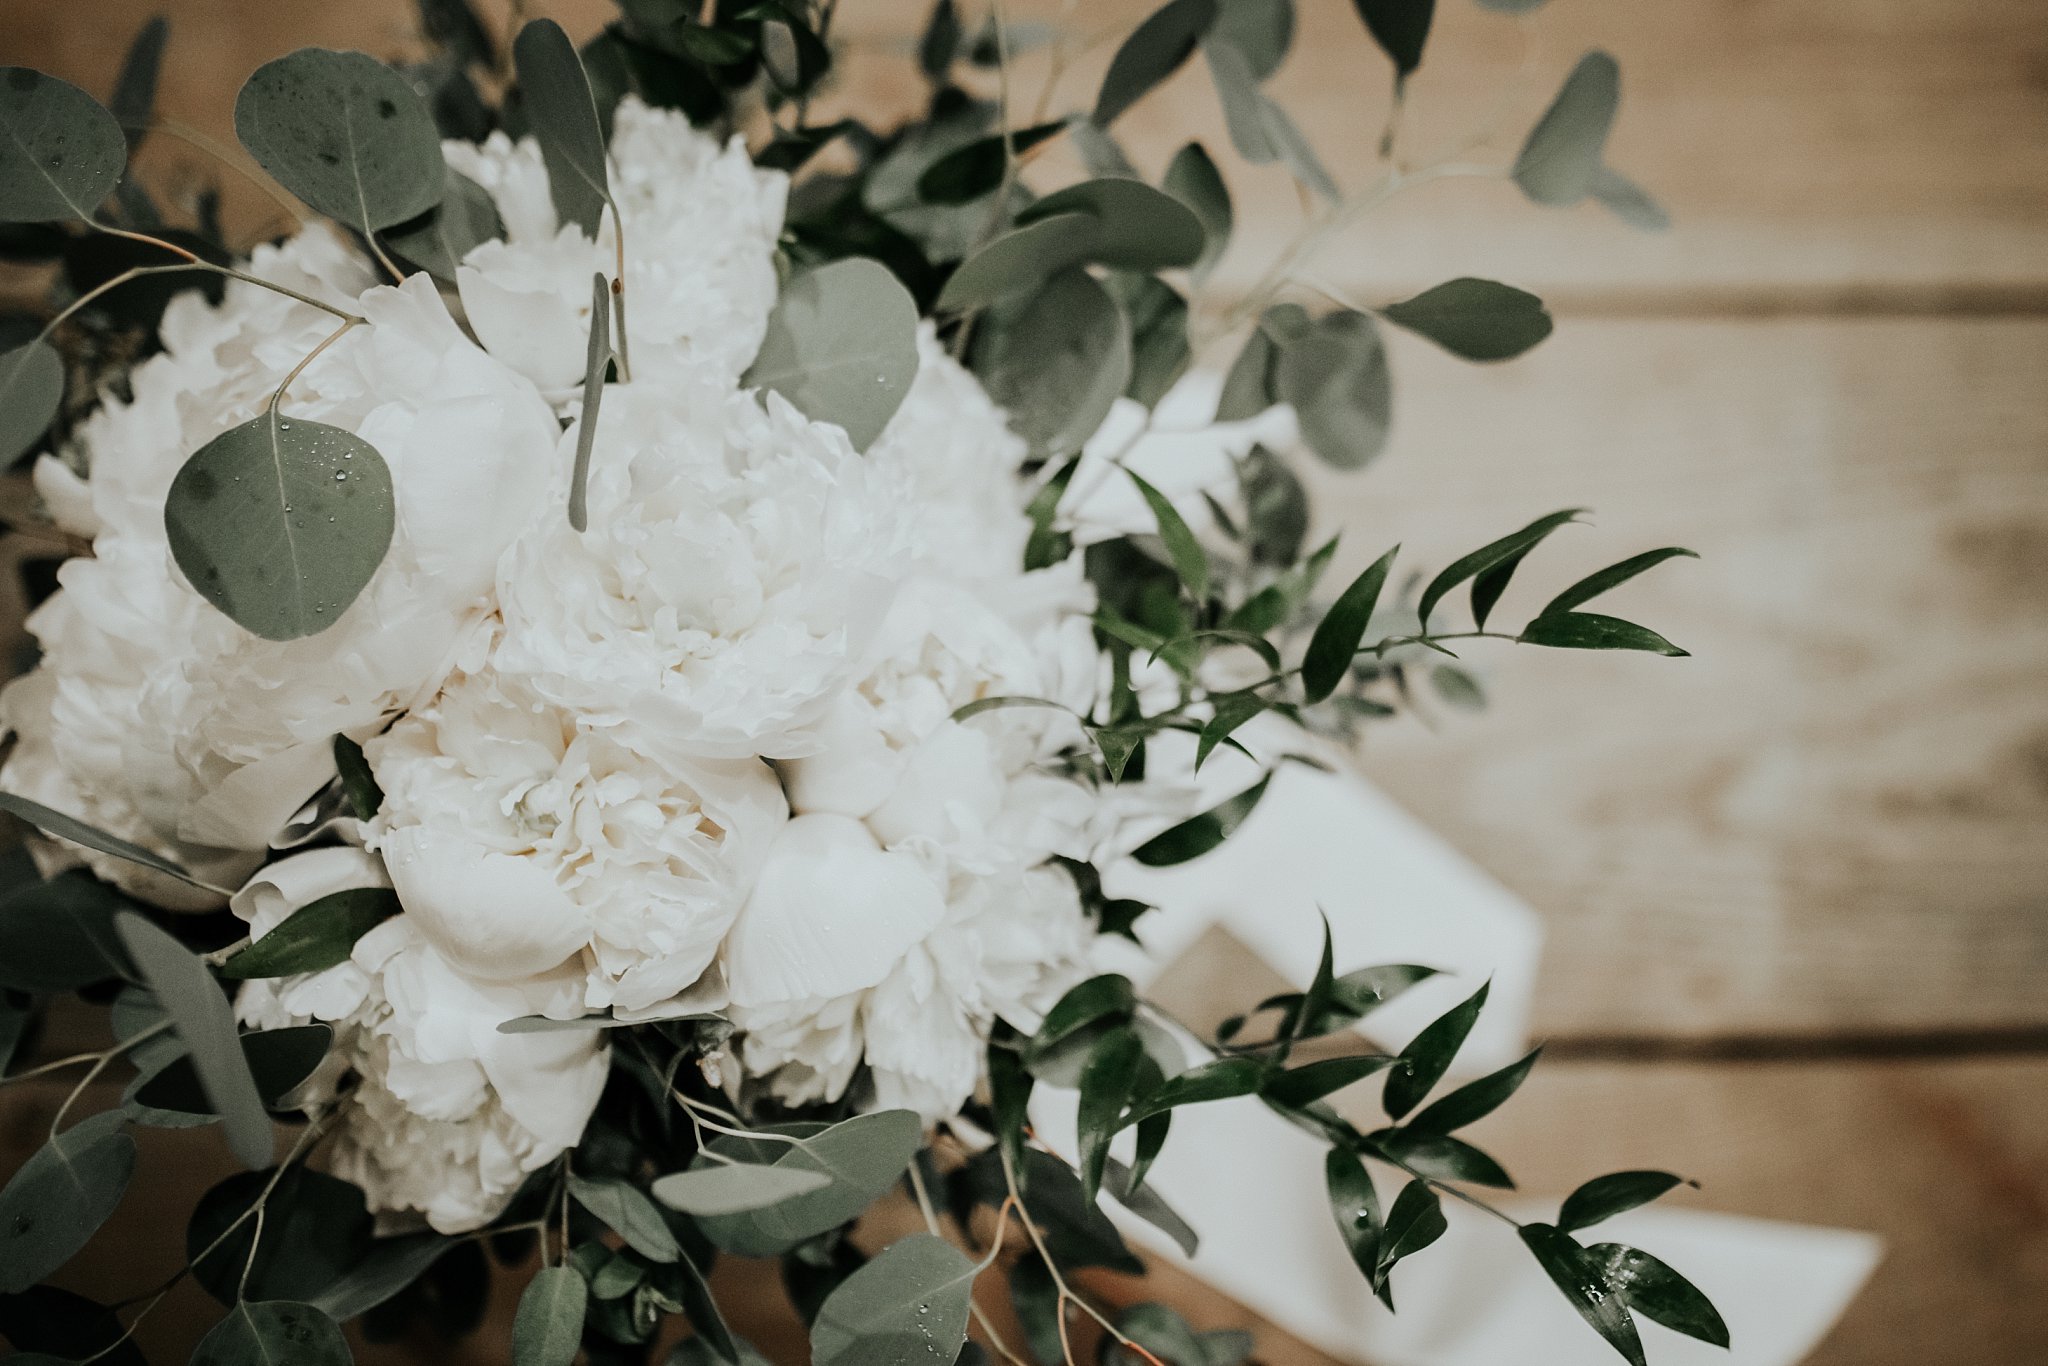 White bridal bouquet with greenery dispersed throughout